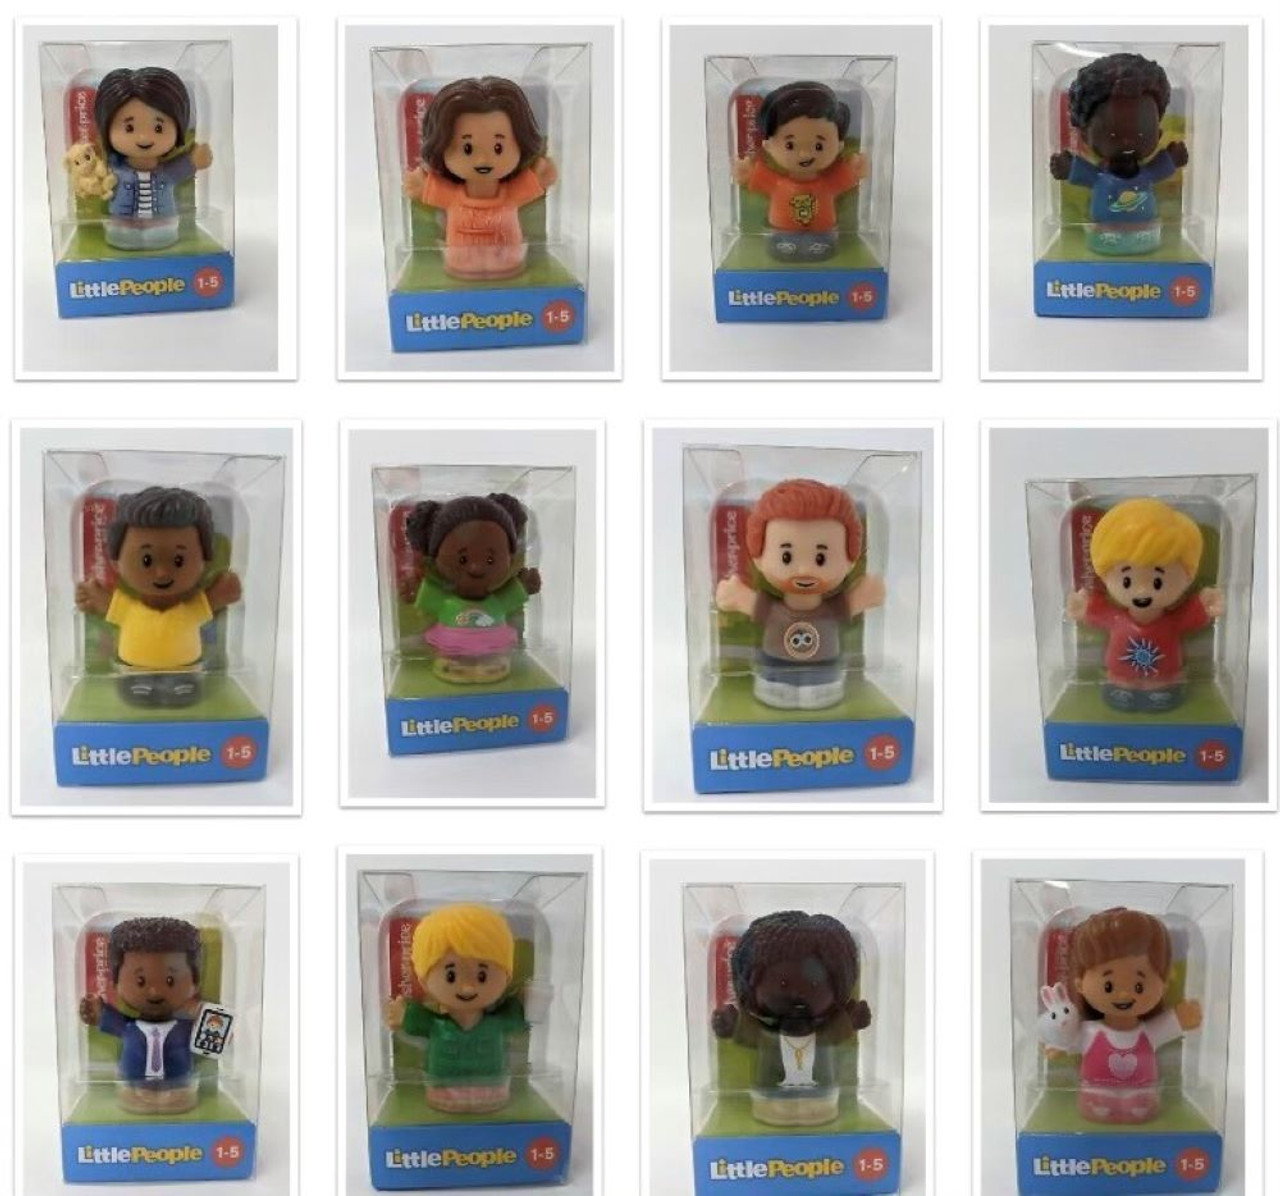 https://cdn11.bigcommerce.com/s-31ycg3ui3f/images/stencil/1280x1280/products/407/1376/Fisher_Price_Little_People_Single_Figures_Variety_2__93239.1628889230.jpg?c=1